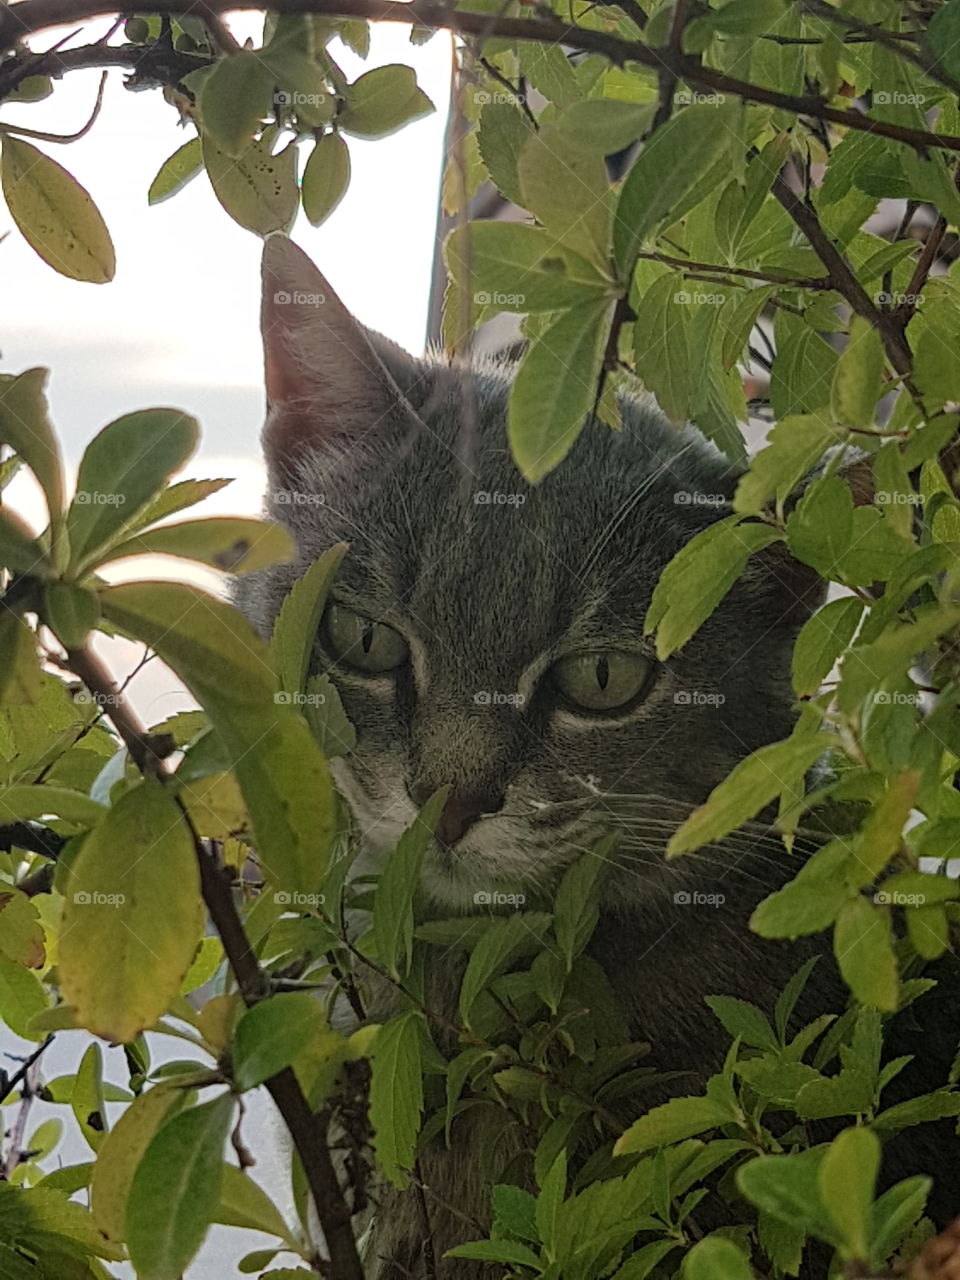 Grey cat with green eyes peering among the leaves